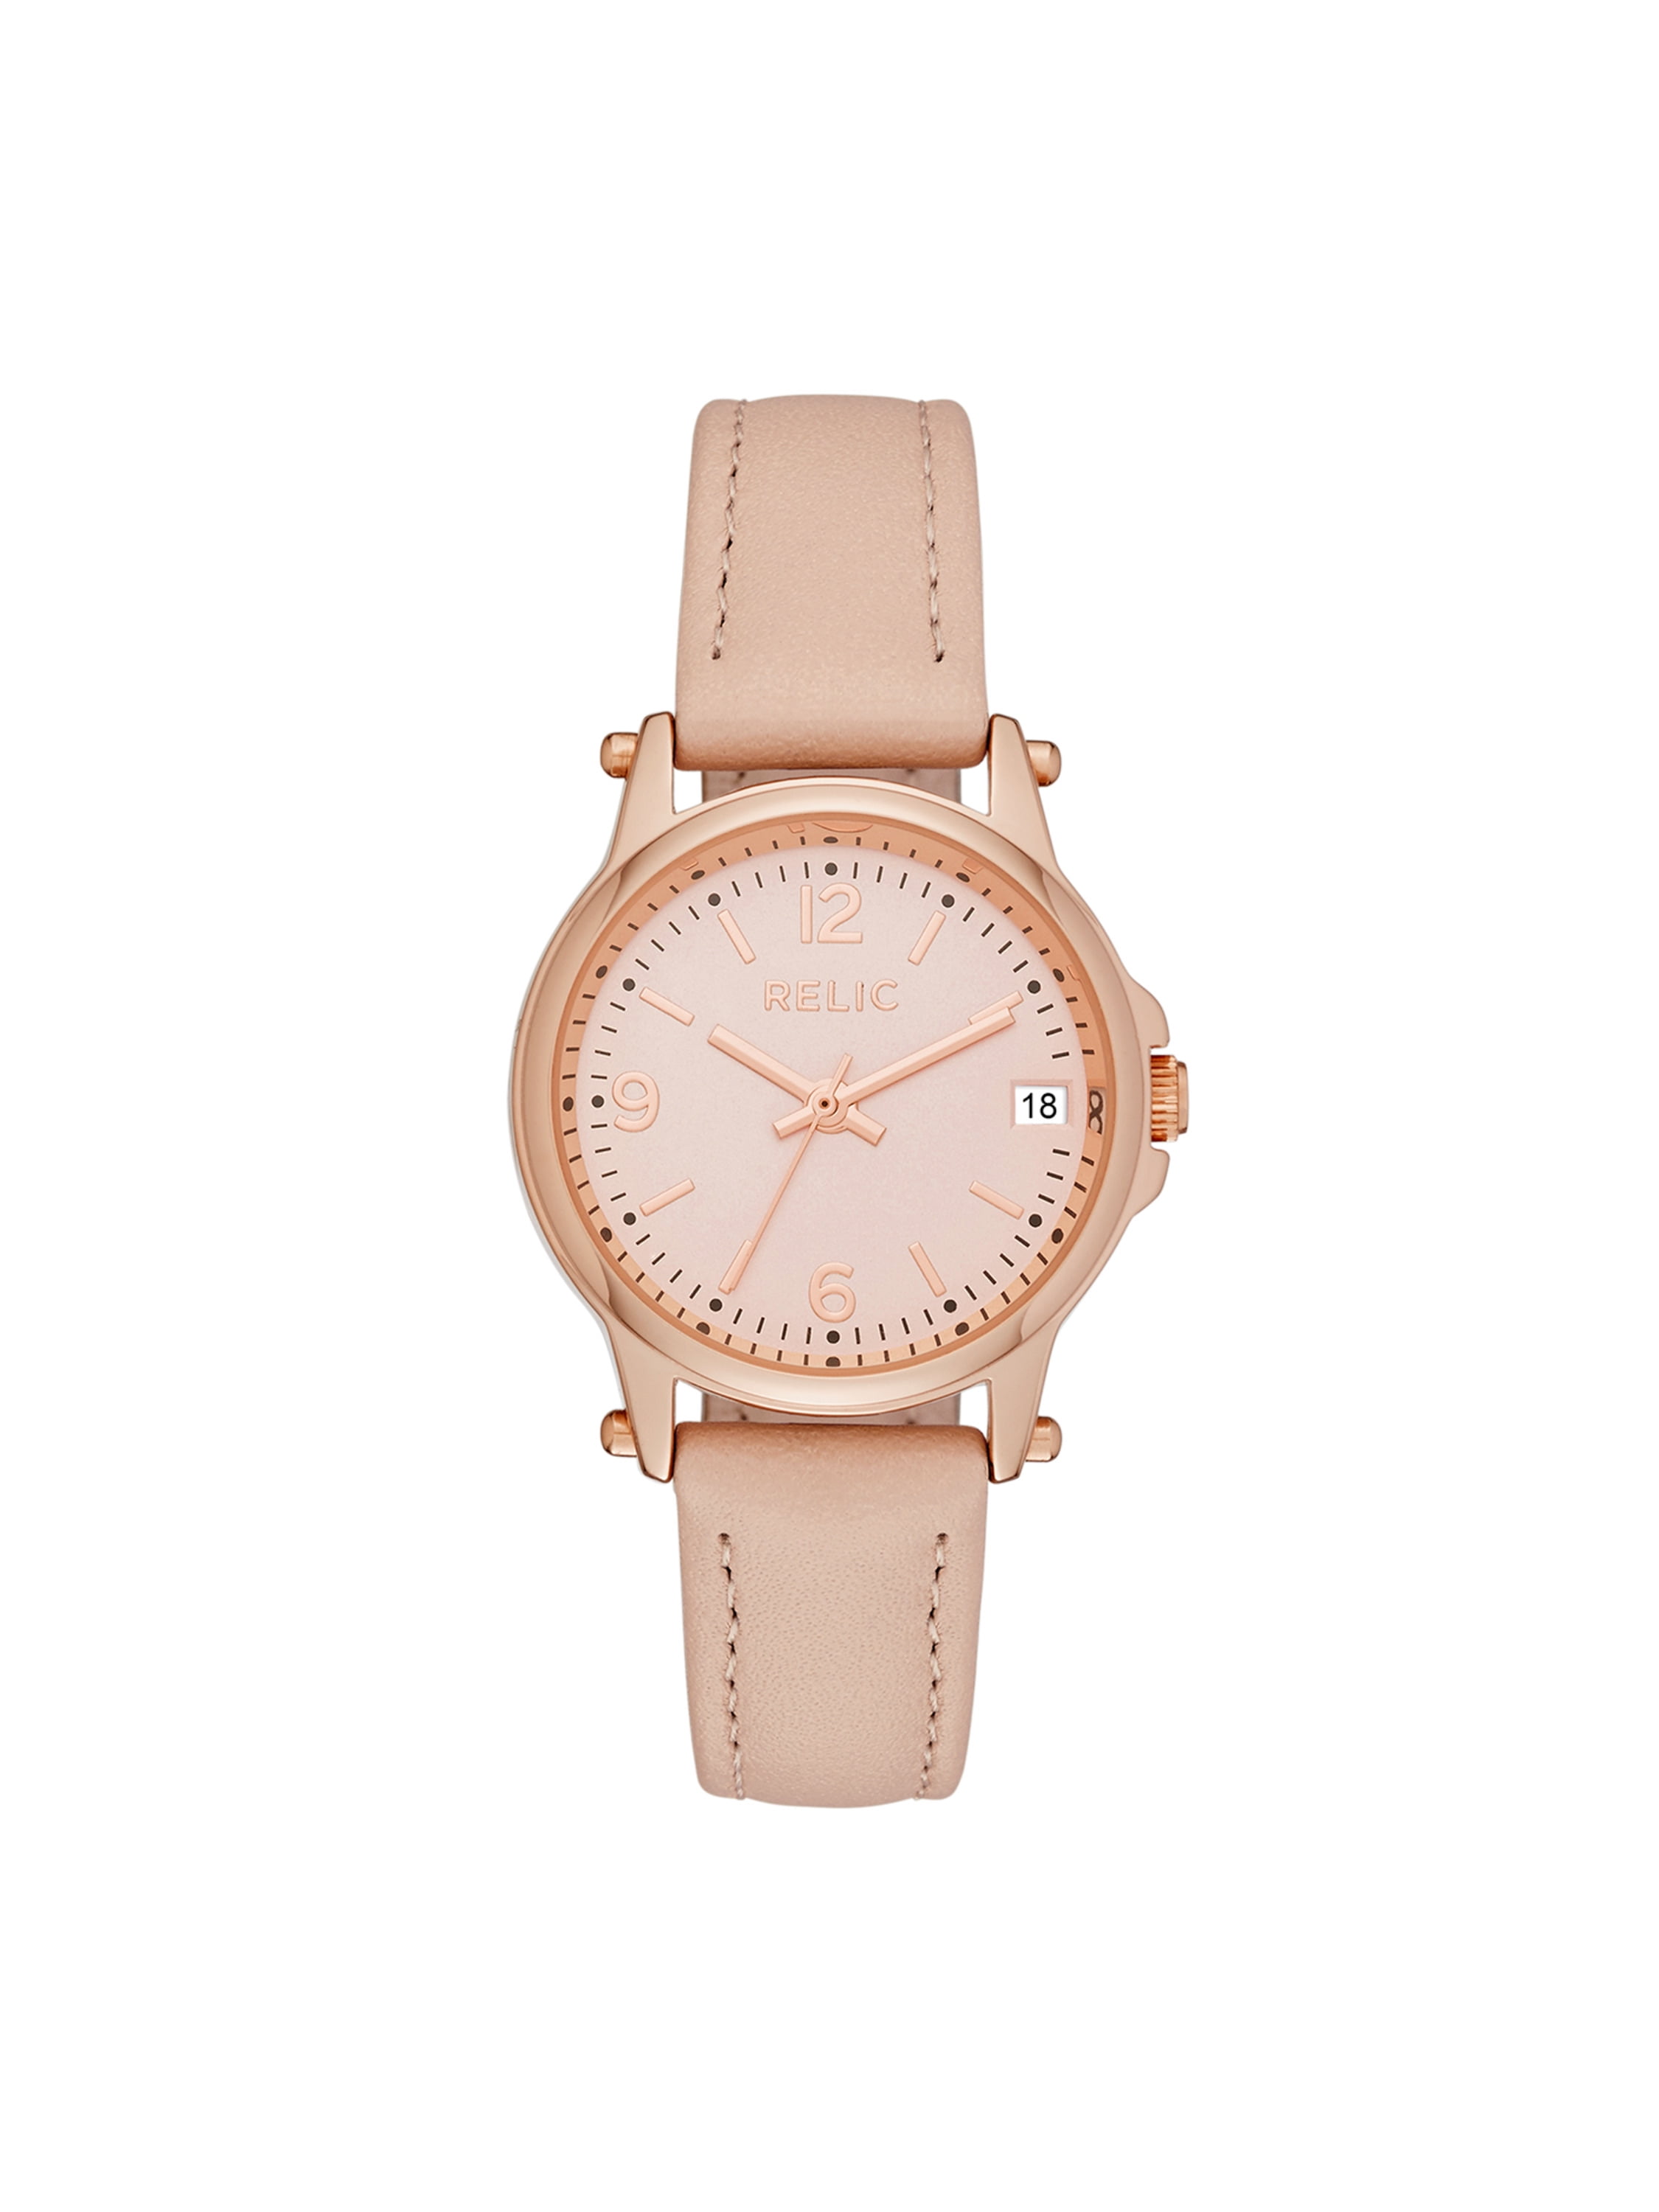 Relic by Fossil Women's Matilda Rose Gold and Blush Pink Leather Watch ...